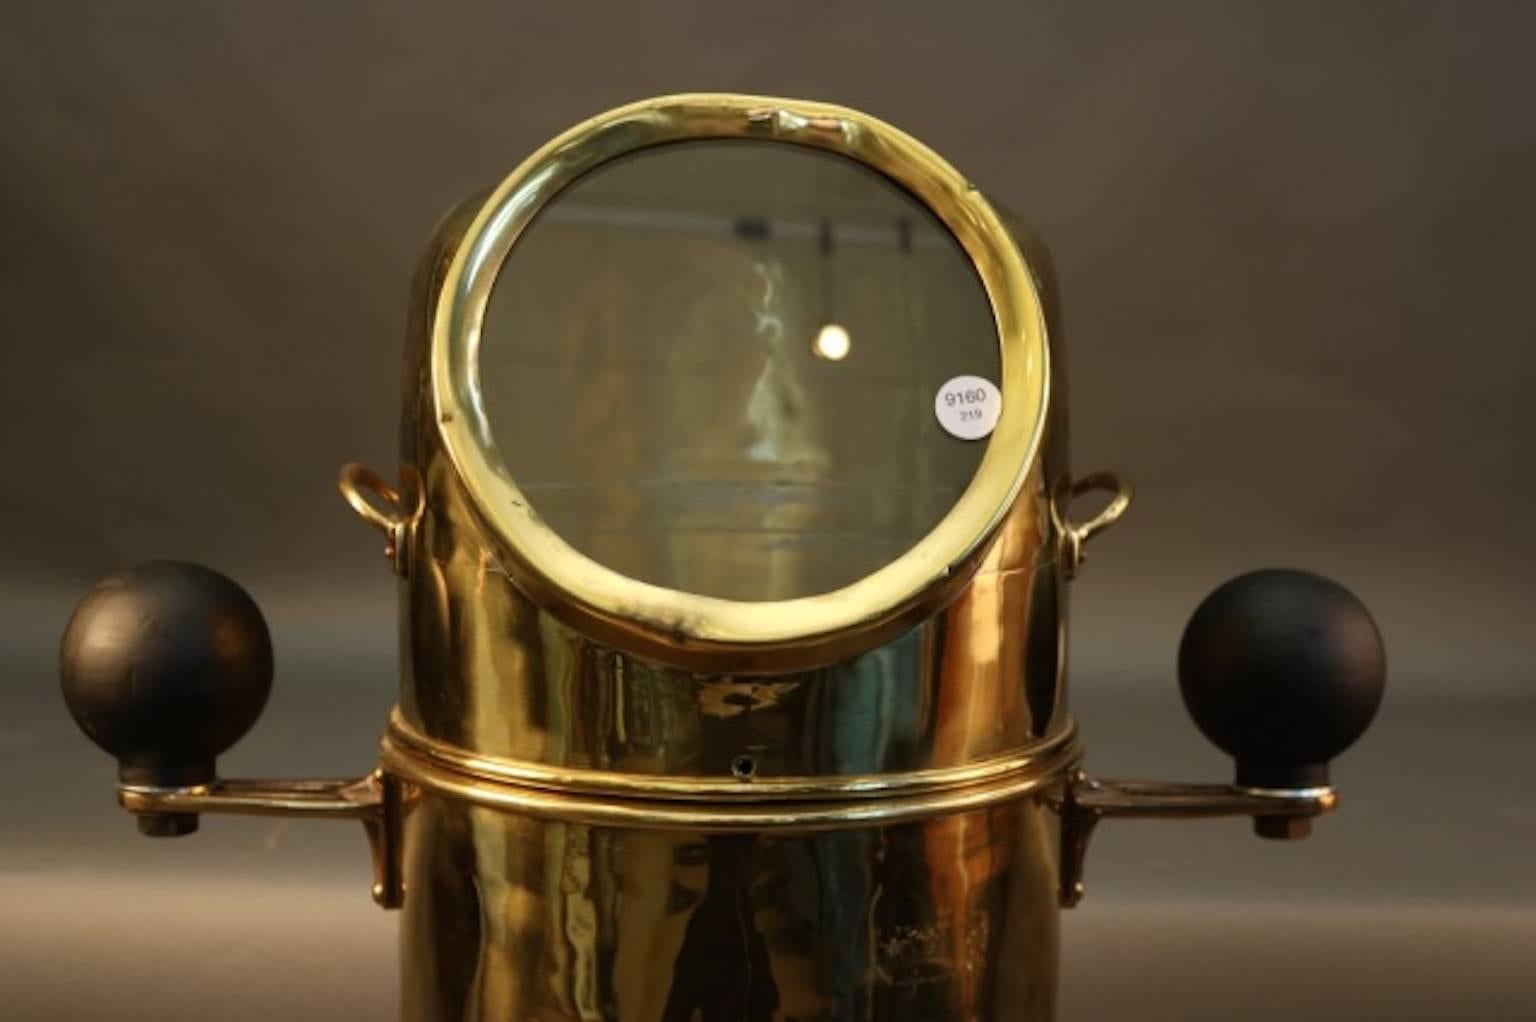 Unique small craft brass binnacle of a rarely seen design. With gimbaled compass, sturdy brass hood and base fastened to a circular hardwood base.